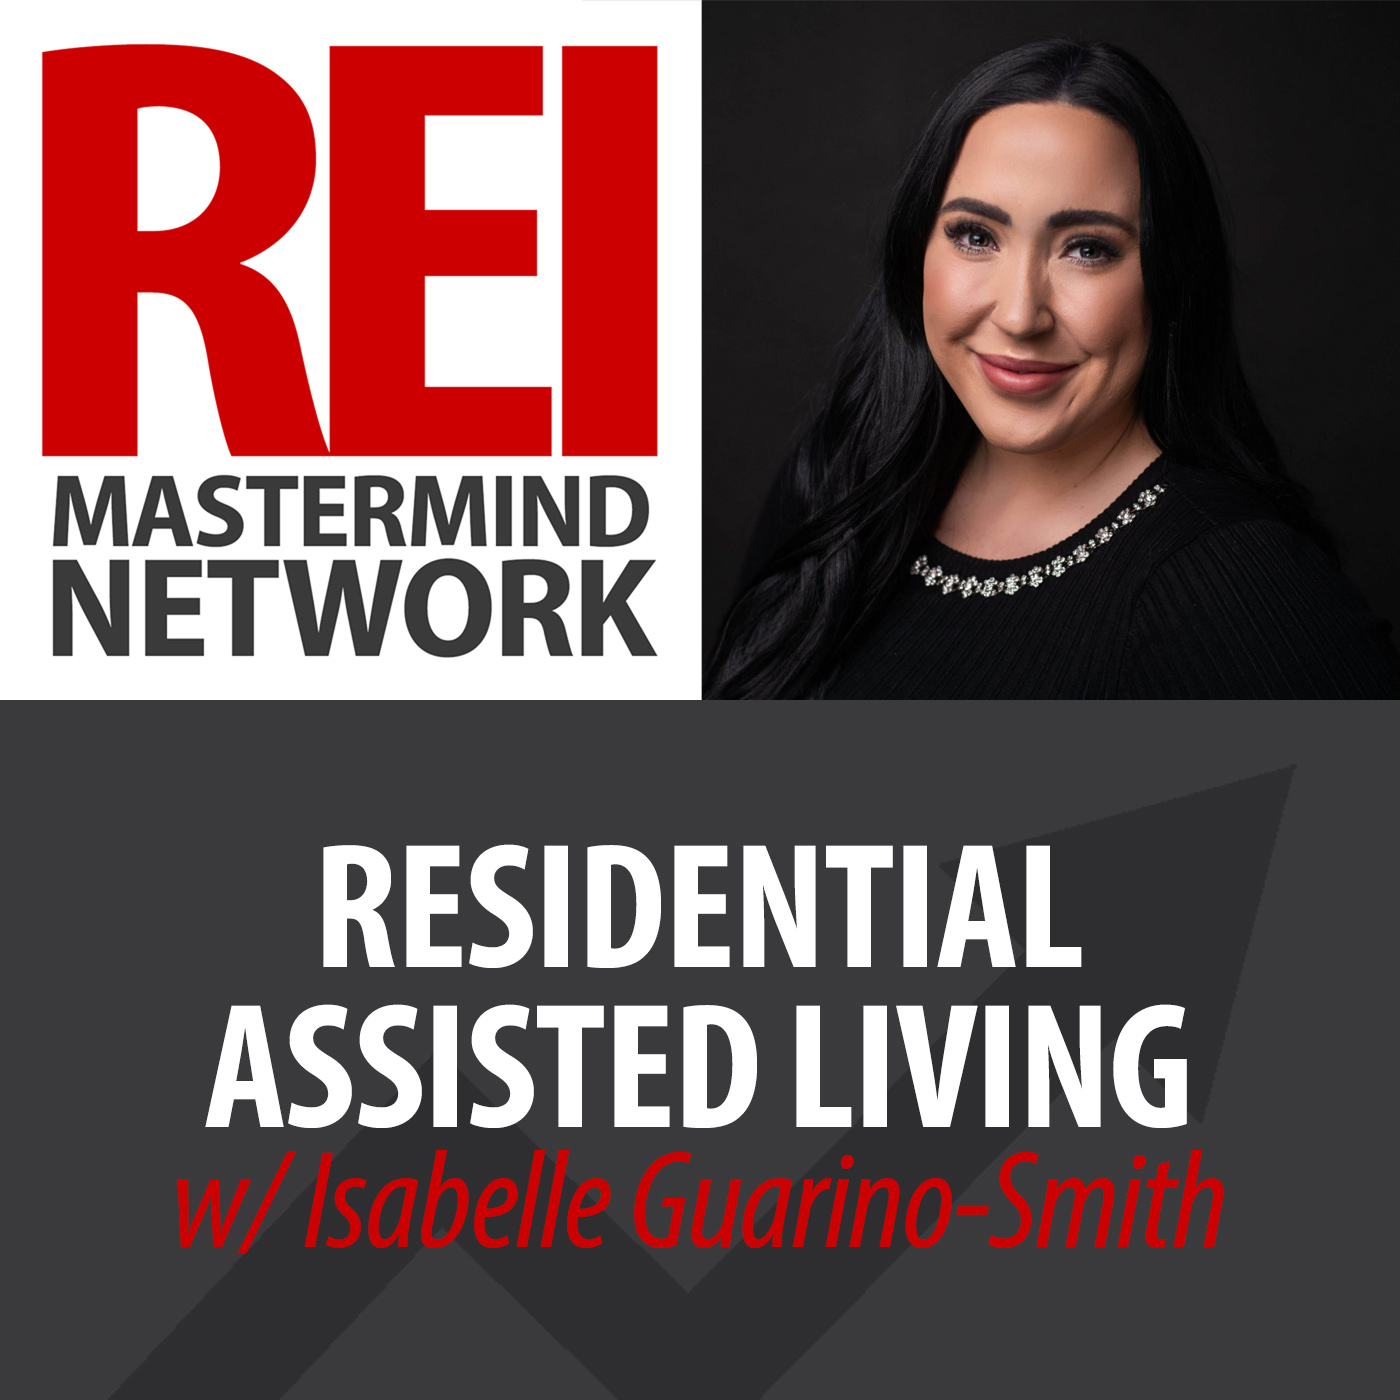 Residential Assisted Living with Isabelle Guarino-Smith Image